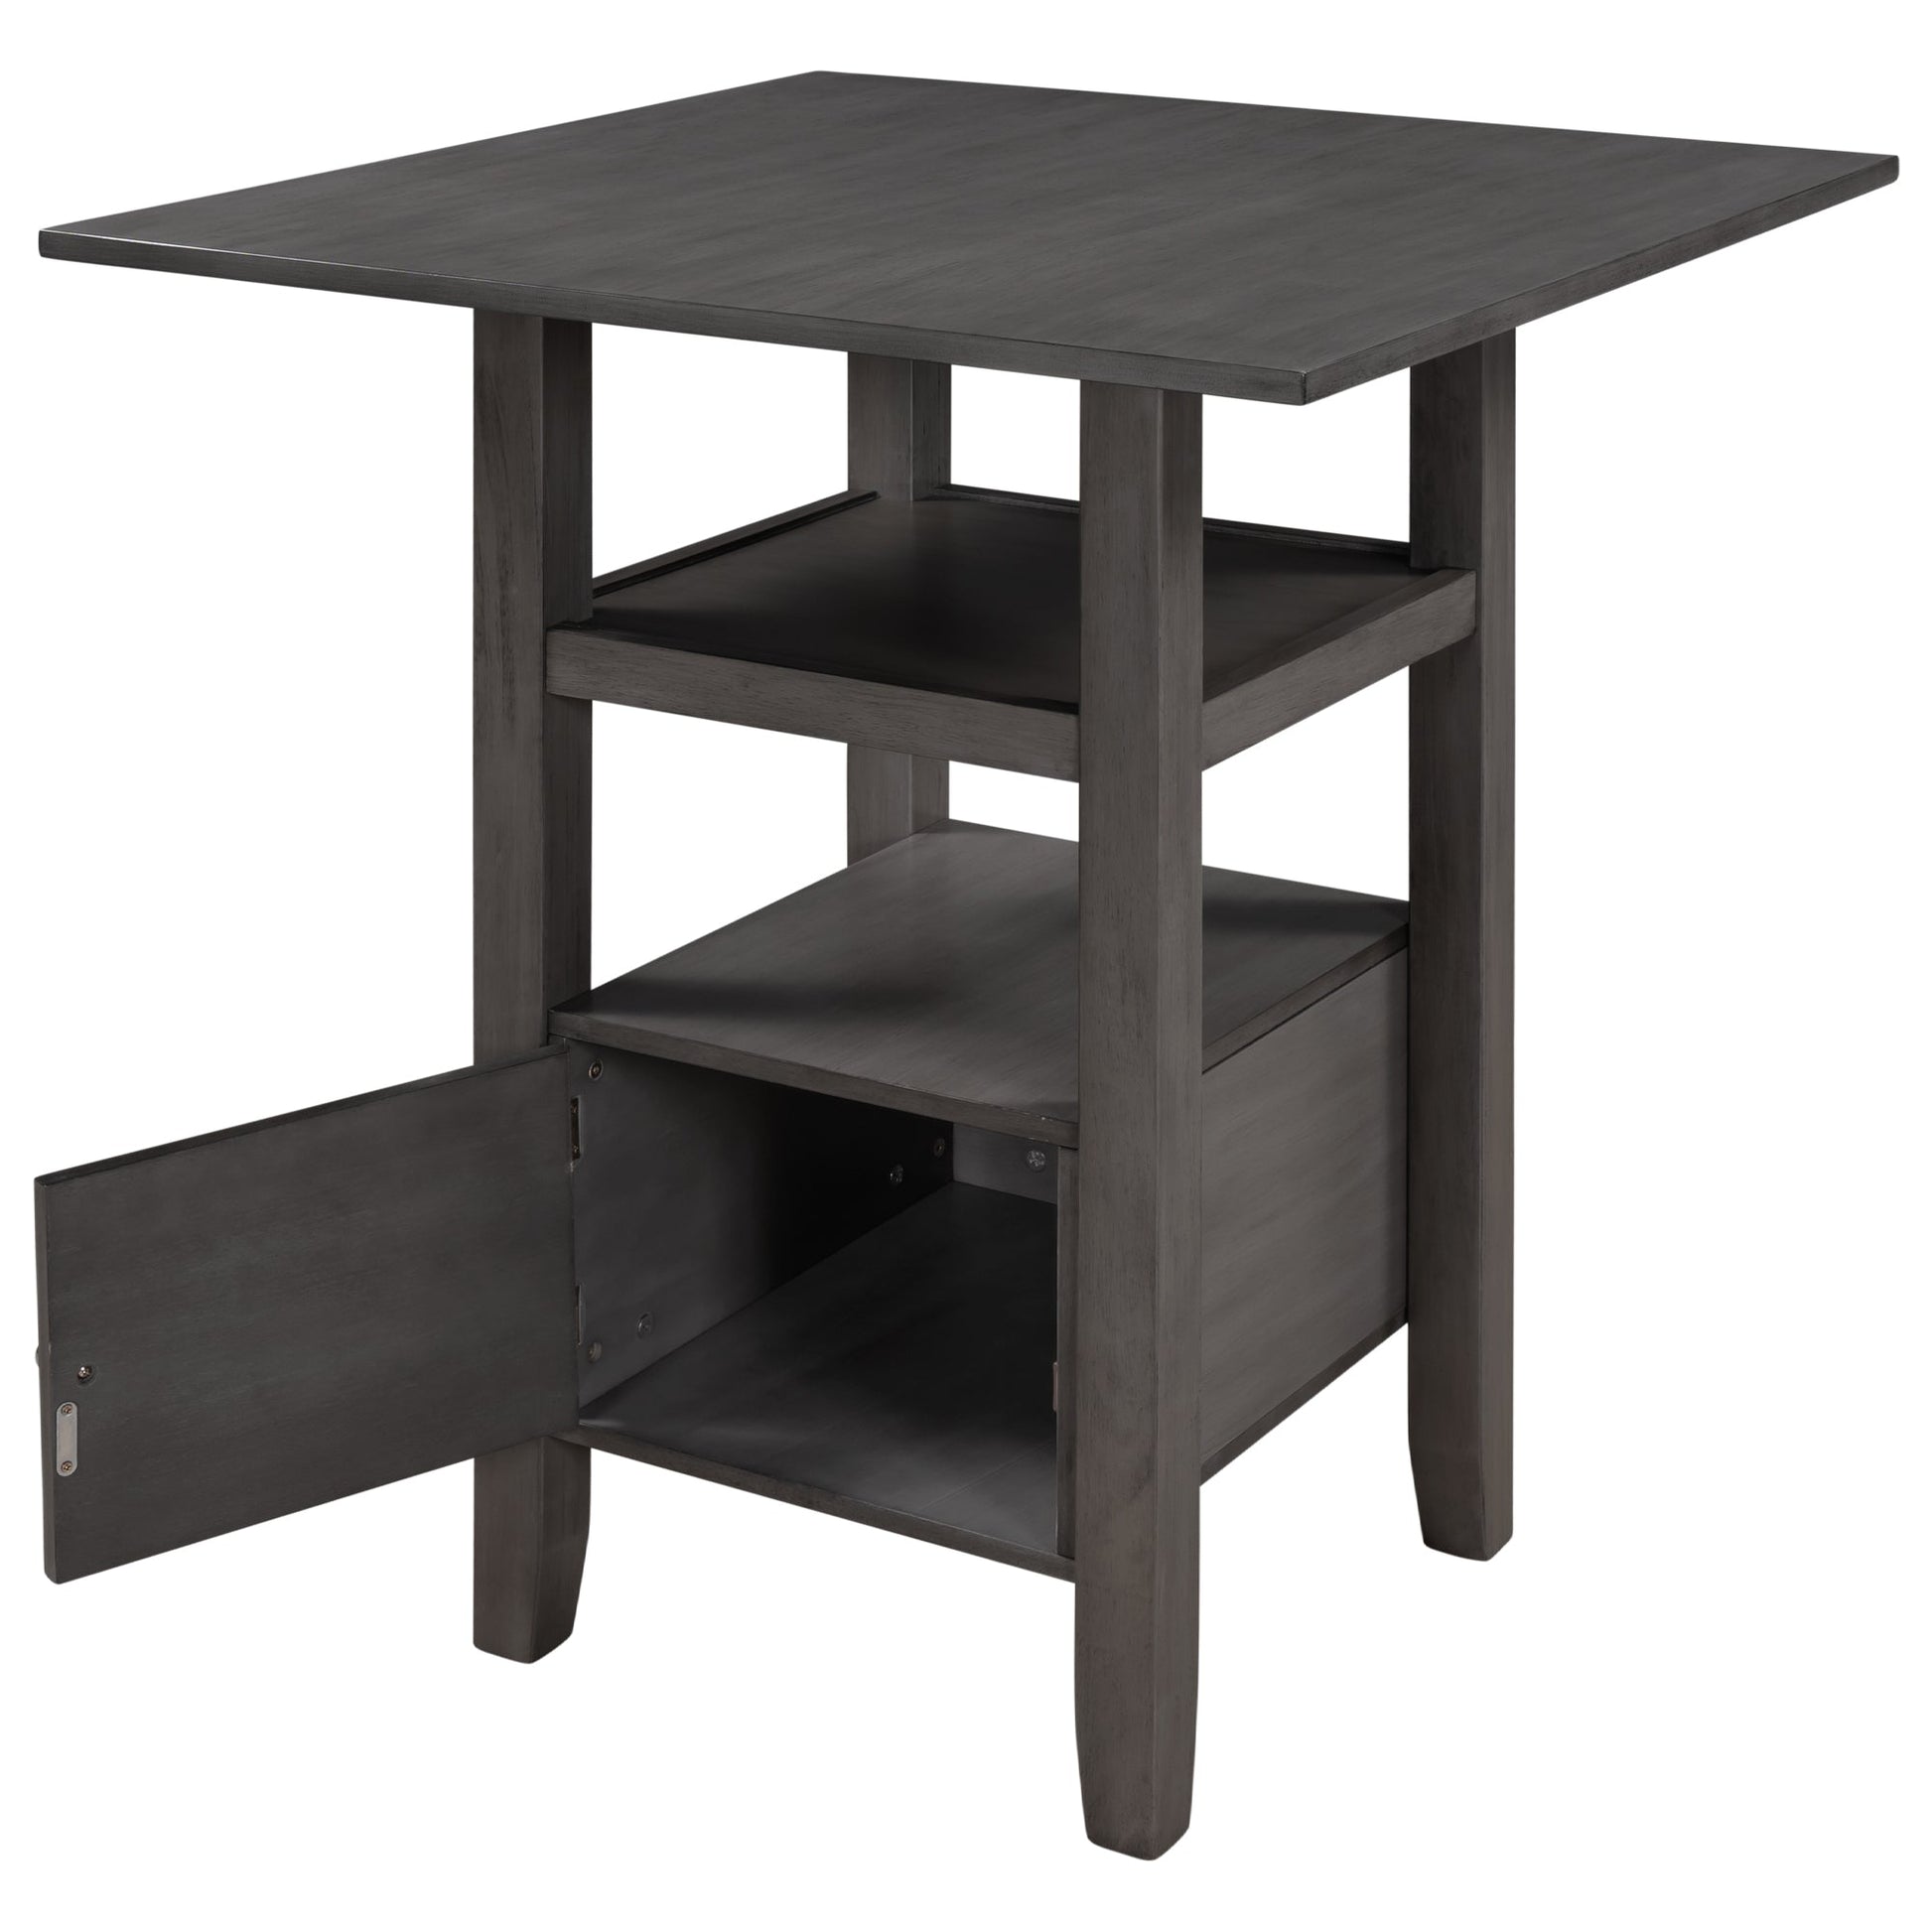 Counter Height Wood Kitchen Dining Table Set with Storage - Gray - Demine Essentials